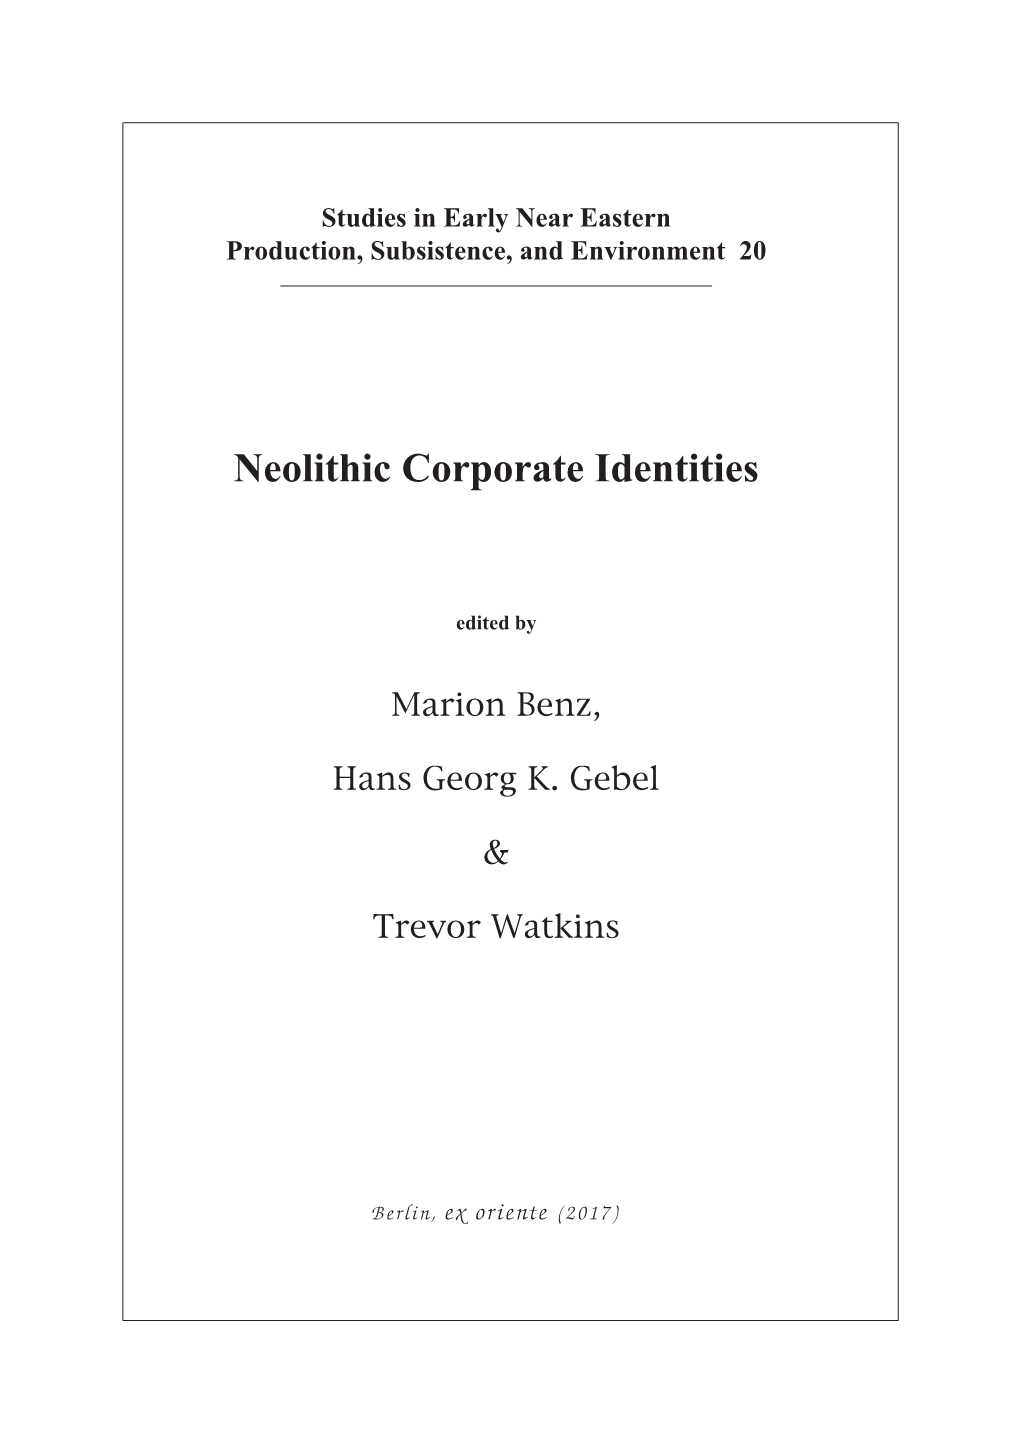 Neolithic Corporate Identities